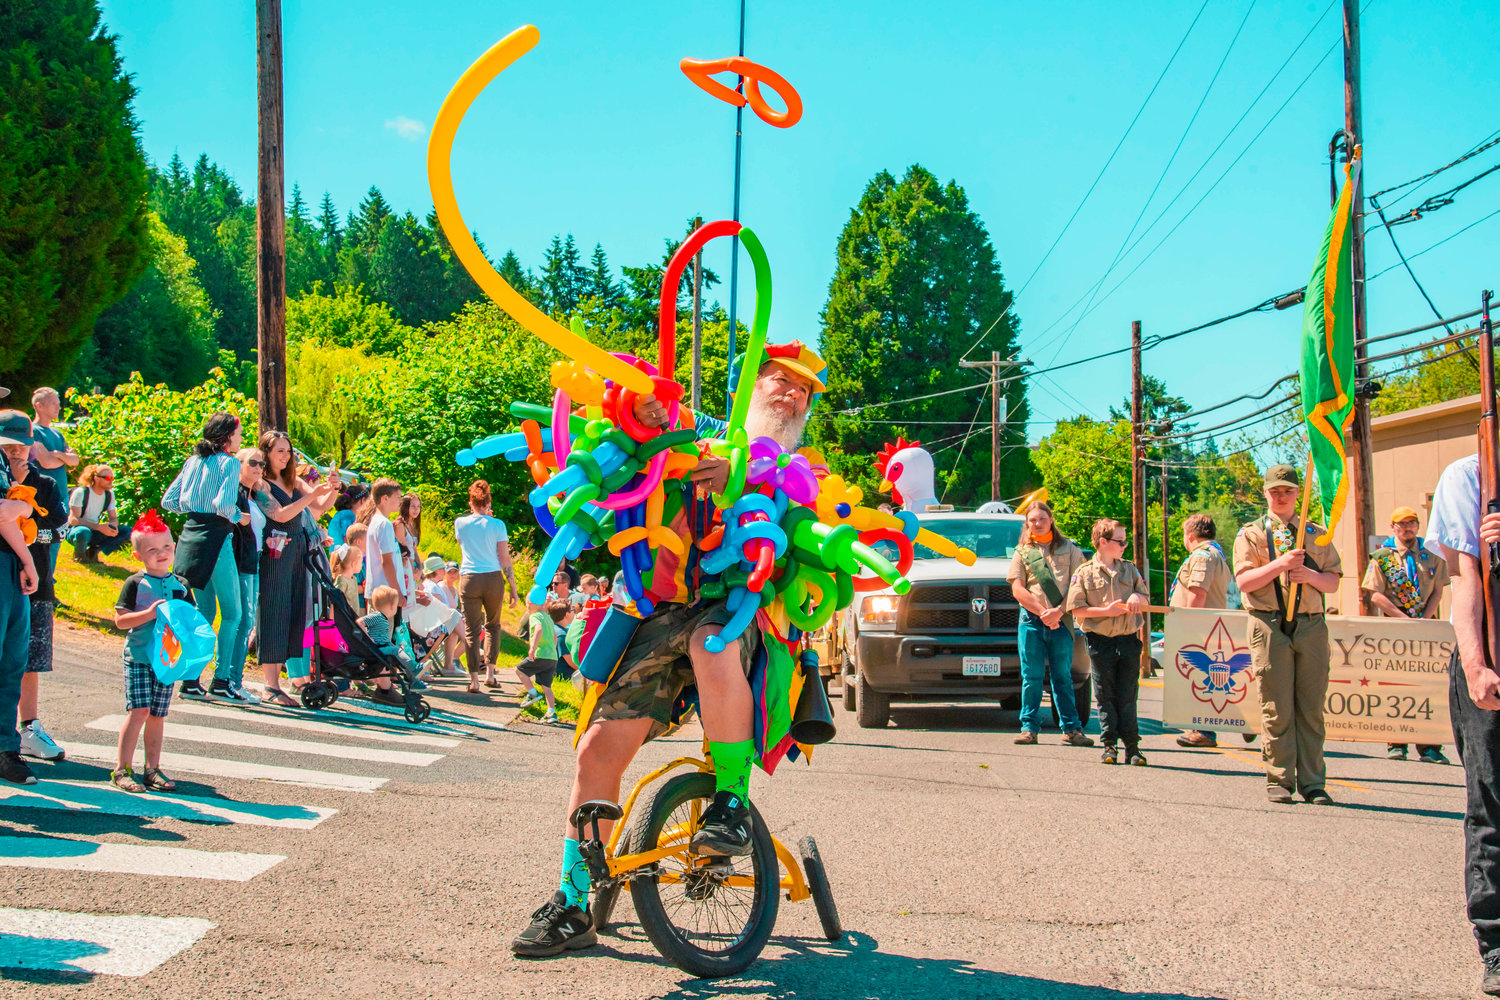 Ken Trombley, a baloon artist known as the BaLunatic, rides a tricycle while filling baloons with air during the Winlock Egg Days parade on Saturday.